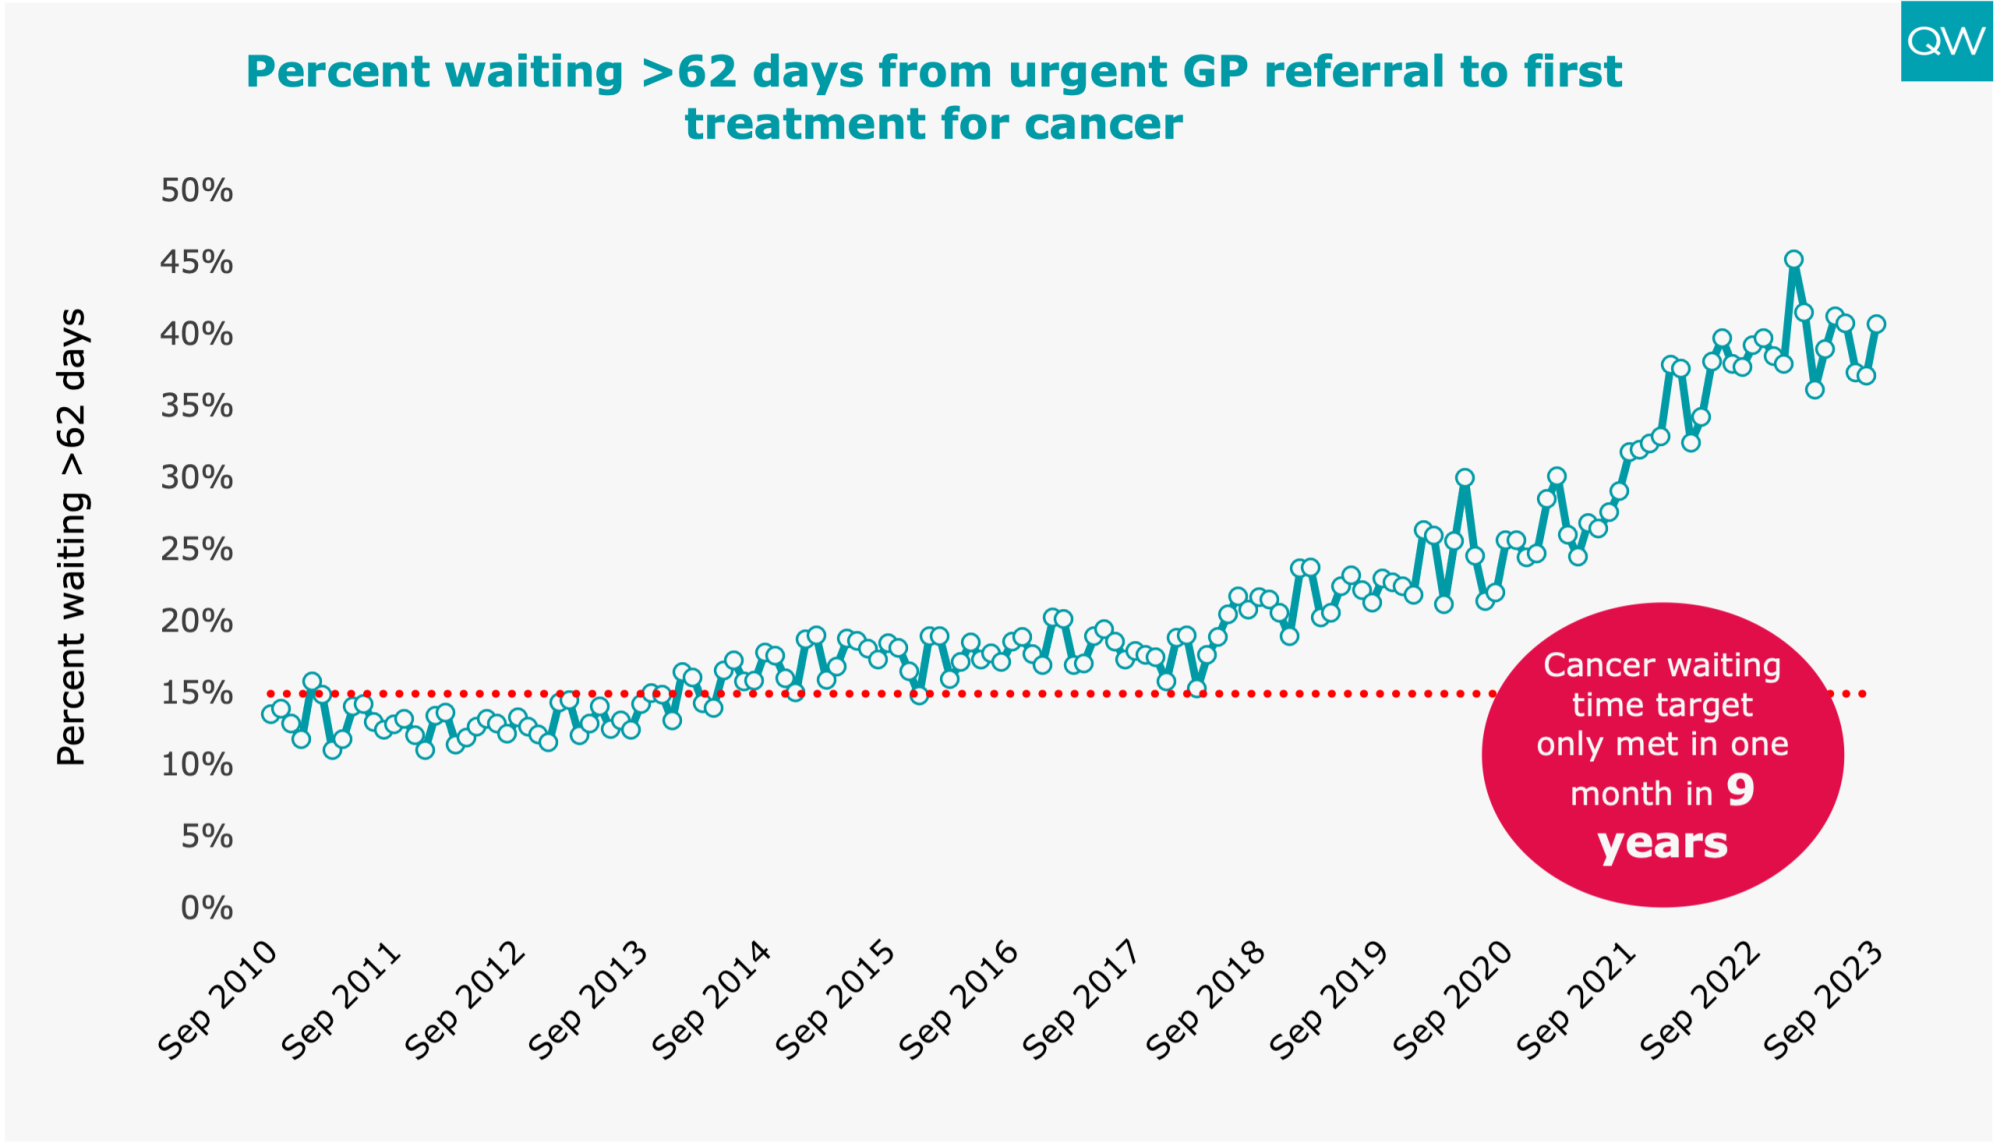 The percentage of people waiting more than 62 days after referral for their first cancer treatment continues to gradually get higher